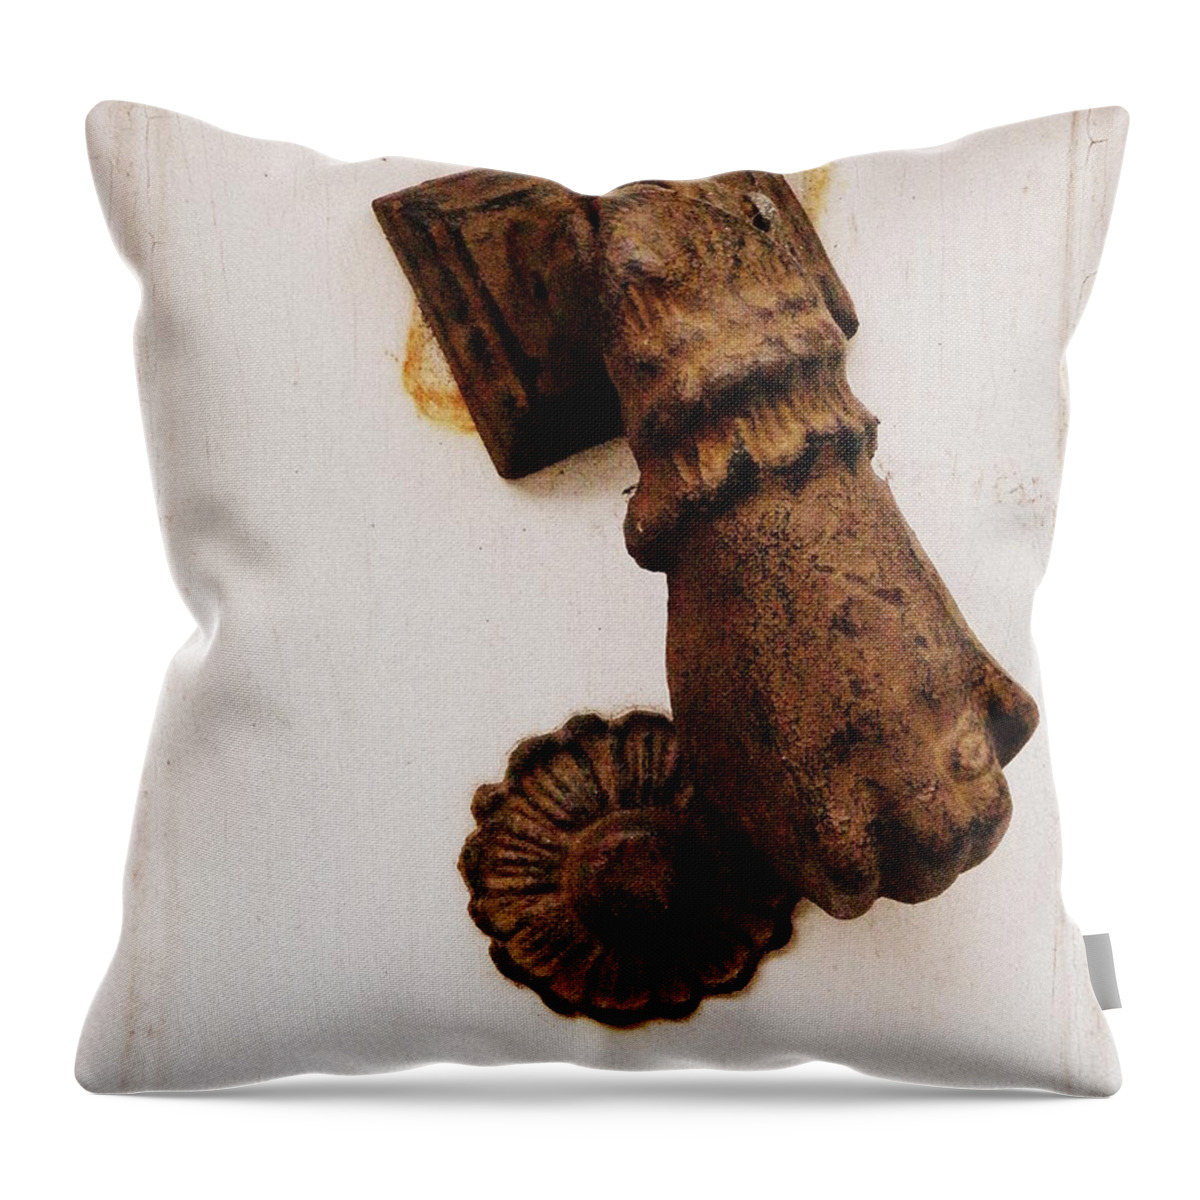 Doorknocker Throw Pillow featuring the photograph Off It's Knocker by Lainie Wrightson